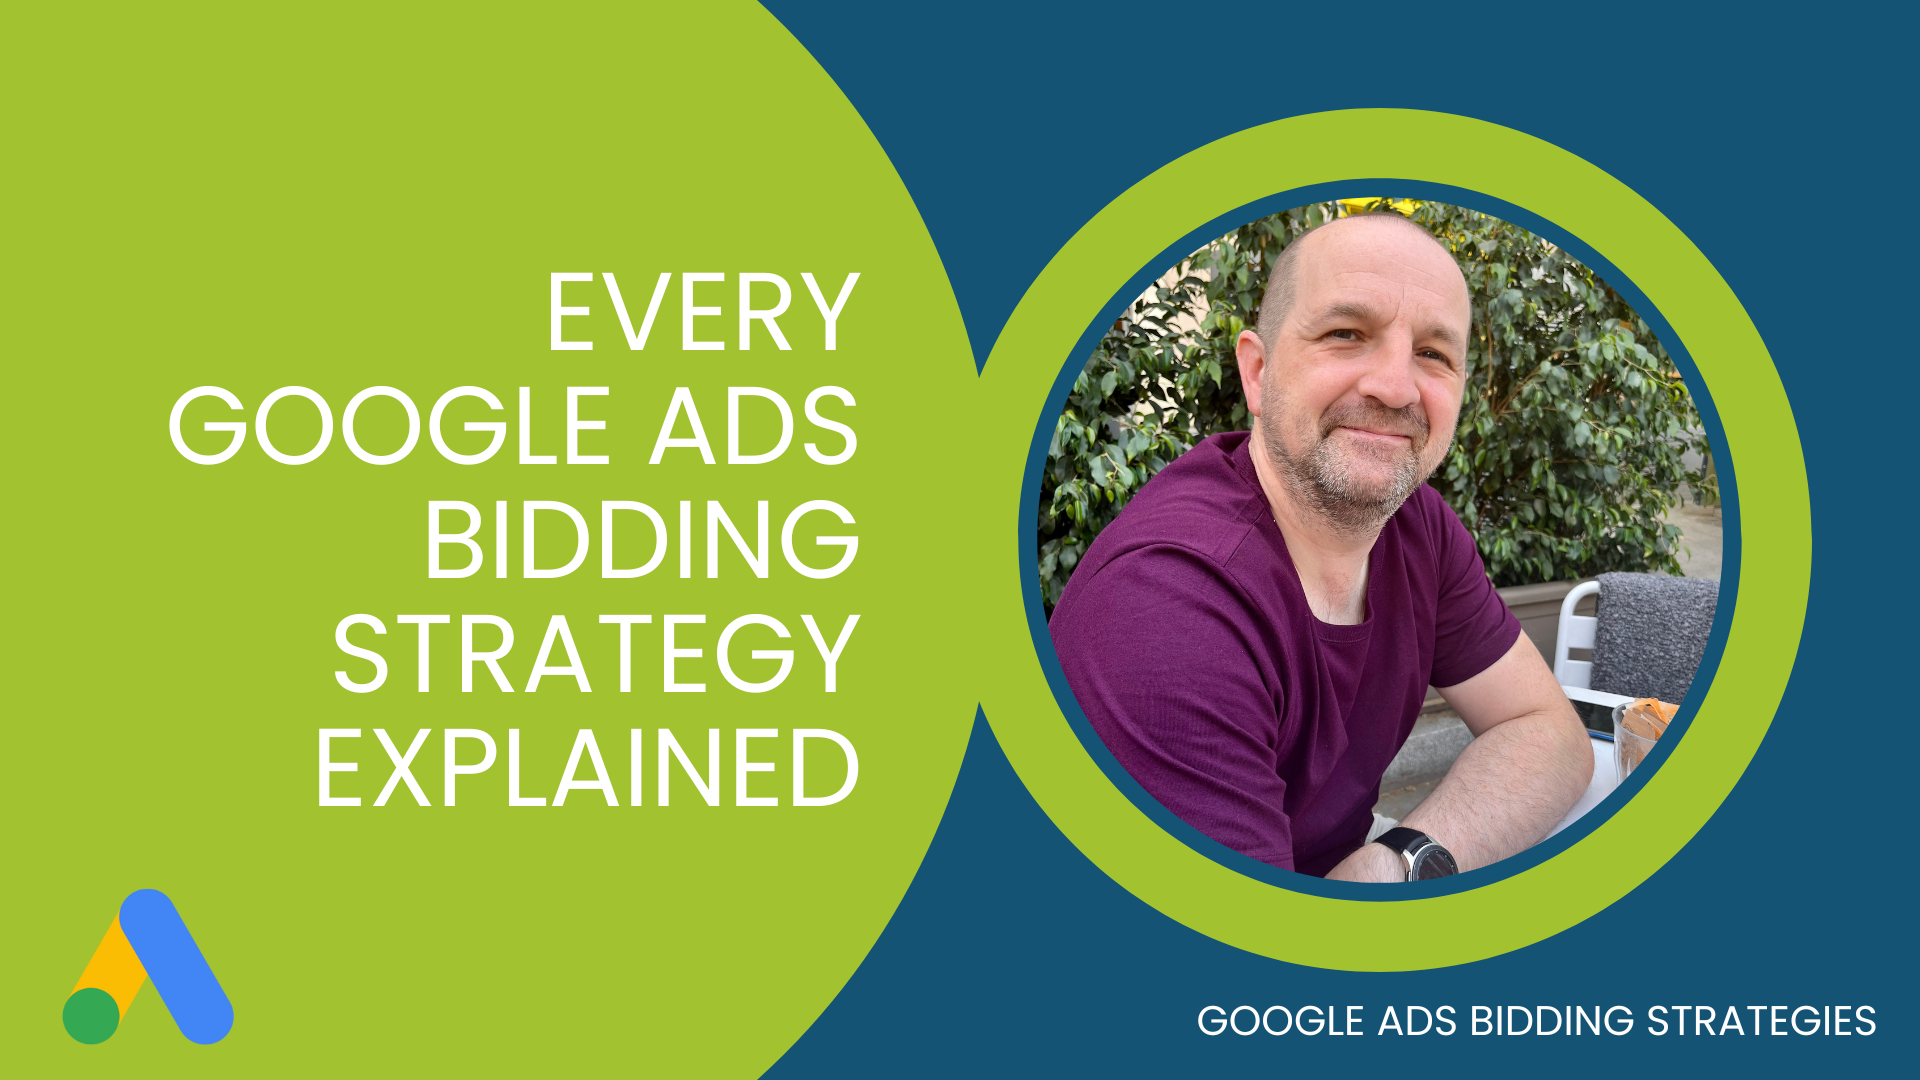 Every Google Ads Bidding Strategy Explained